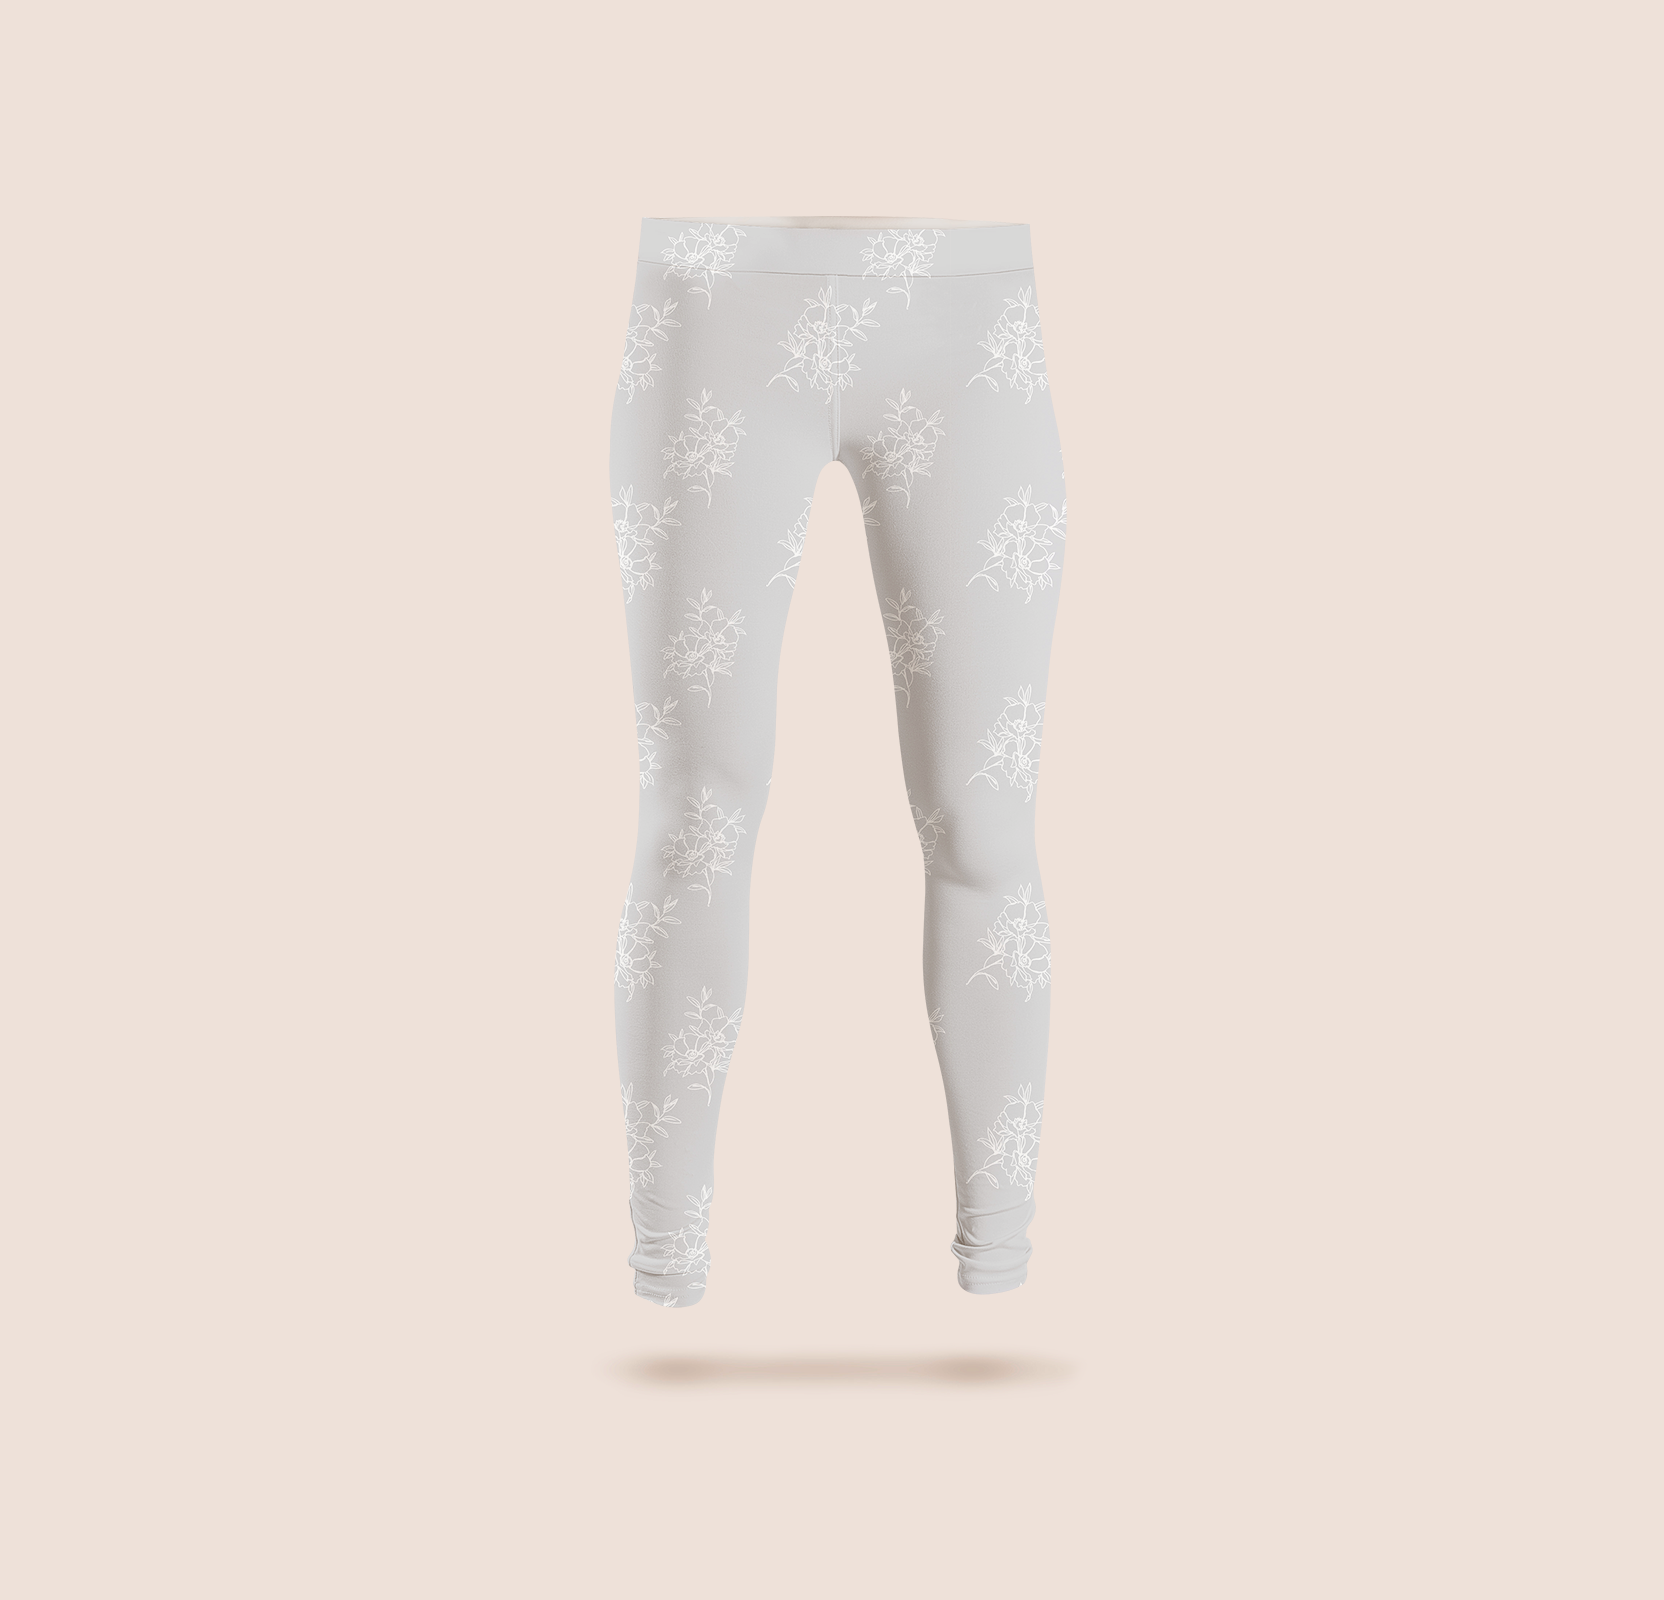 Floral dream pastel in grey pattern design printed on recycled fabric leggings mockup